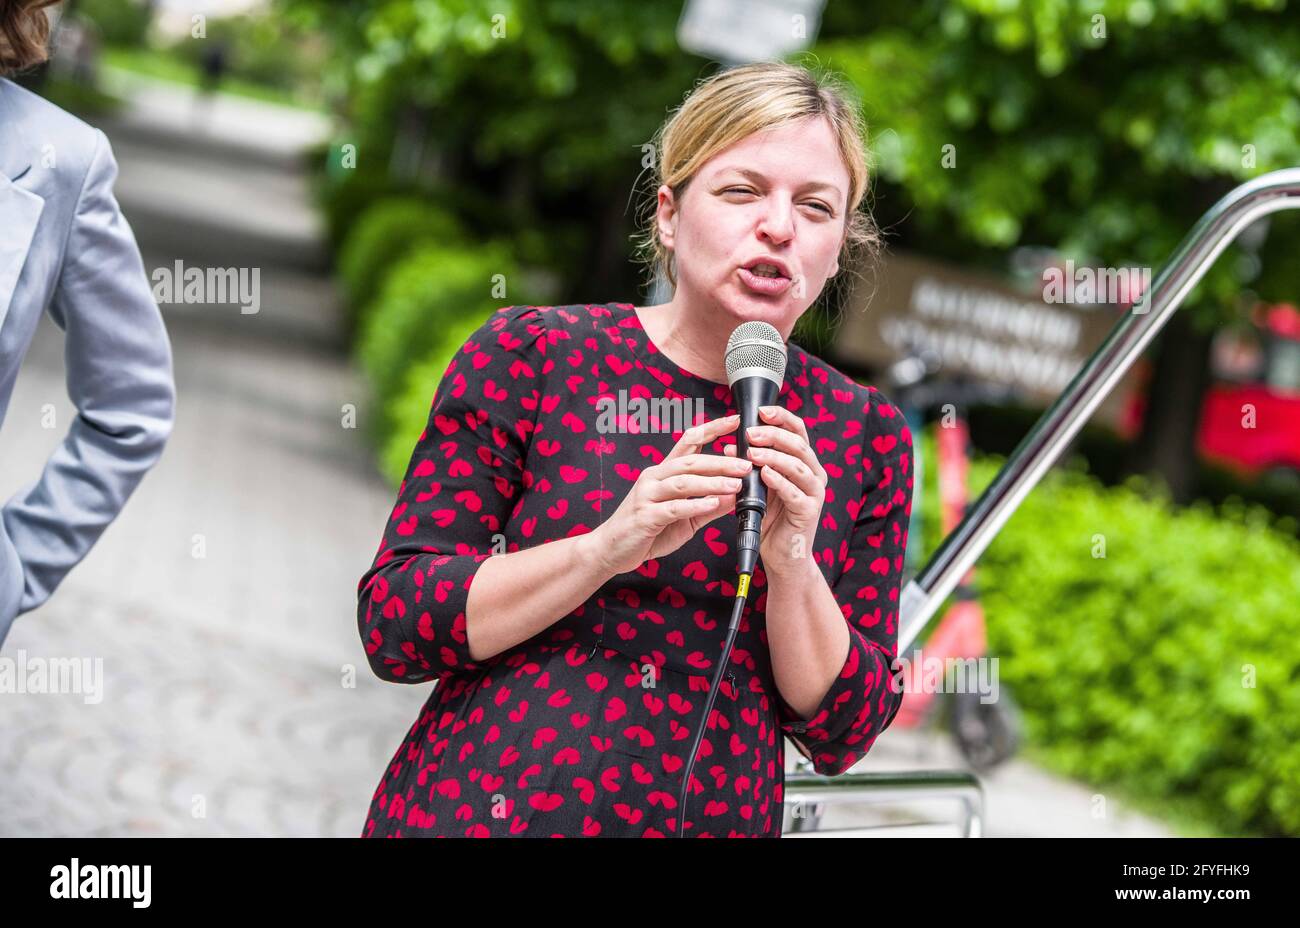 May 28, 2021, Munich, Bavaria, Germany: KATHARINA SCHULZE of the Bavarian Greens who often pointed at the Staatskanzlei while blaming ''the Soeder government'' for the poor working conditions for healthcare workers. The Bavarian Greens (die Gruenen/Buendnis90) organized a protest action at the Bavarian Staatskanzlei (government building) in support of healthcare workers. During the Coronavirus crisis, the working conditions for this sector have come into greater focus and The Greens are pushing for better politics for this sector where pay structures and working conditions are improved and th Stock Photo